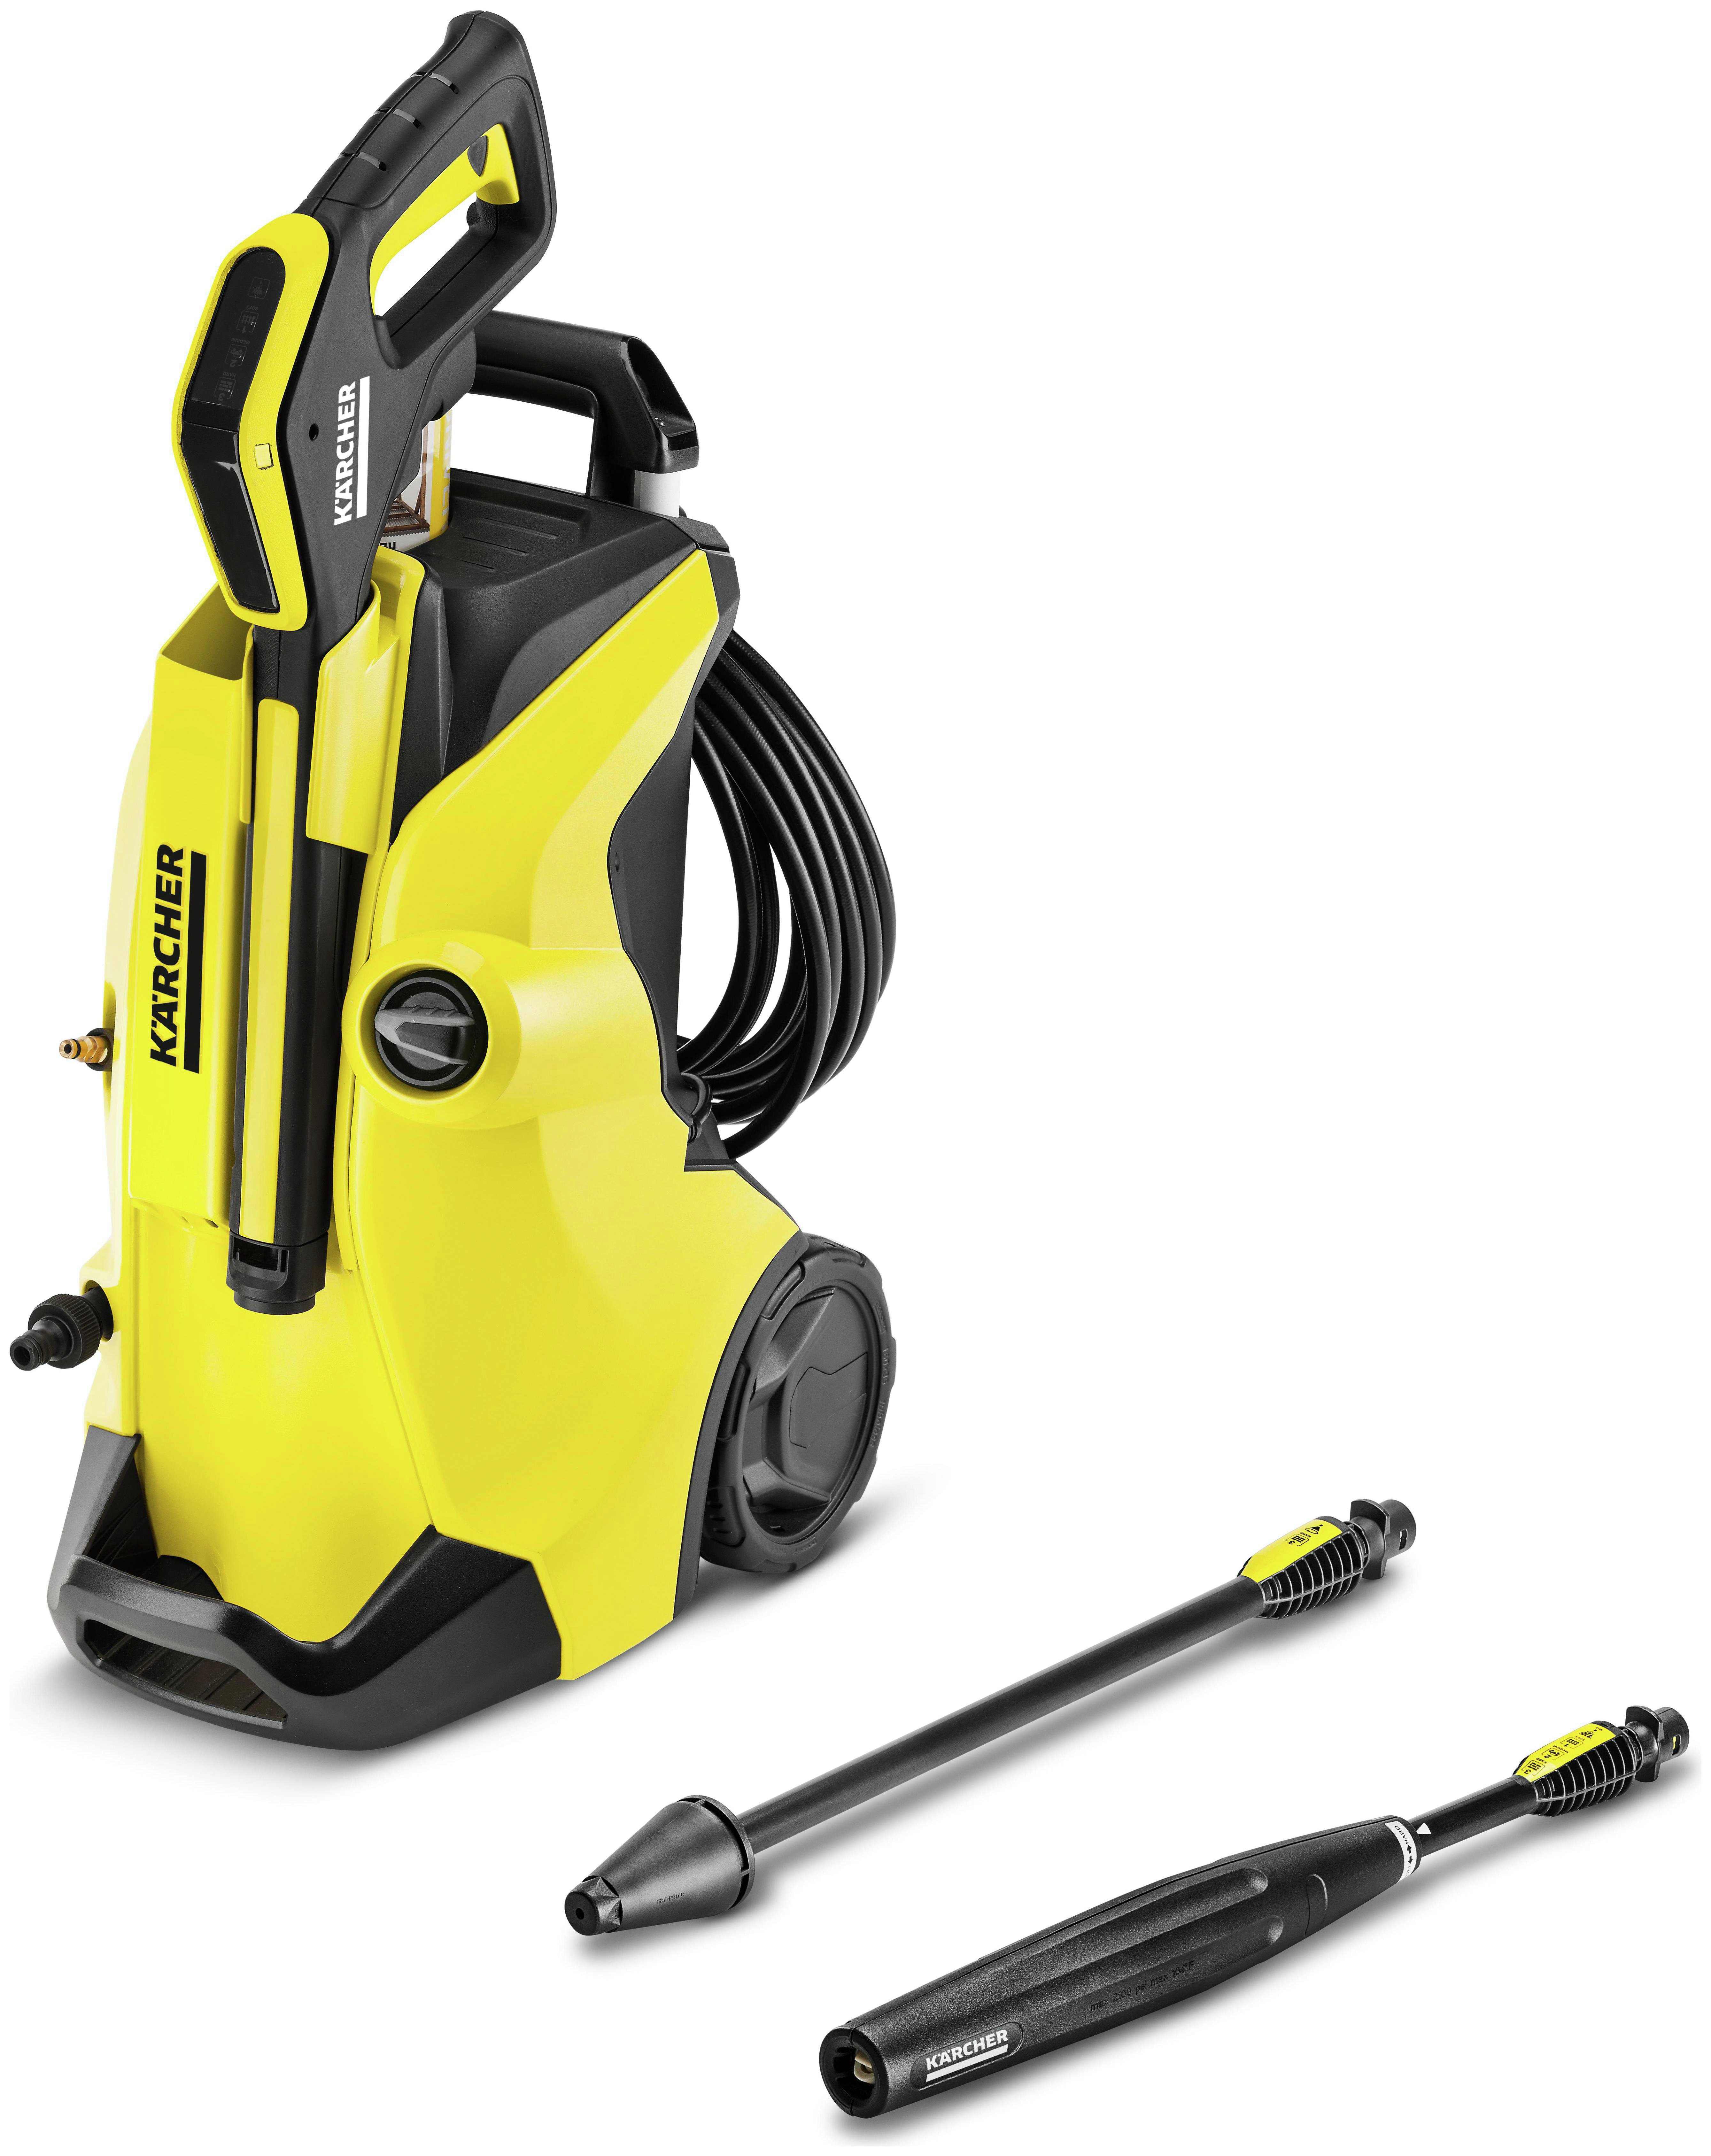 Karcher - K4 Full Control Pressure Washer - 1800W Review